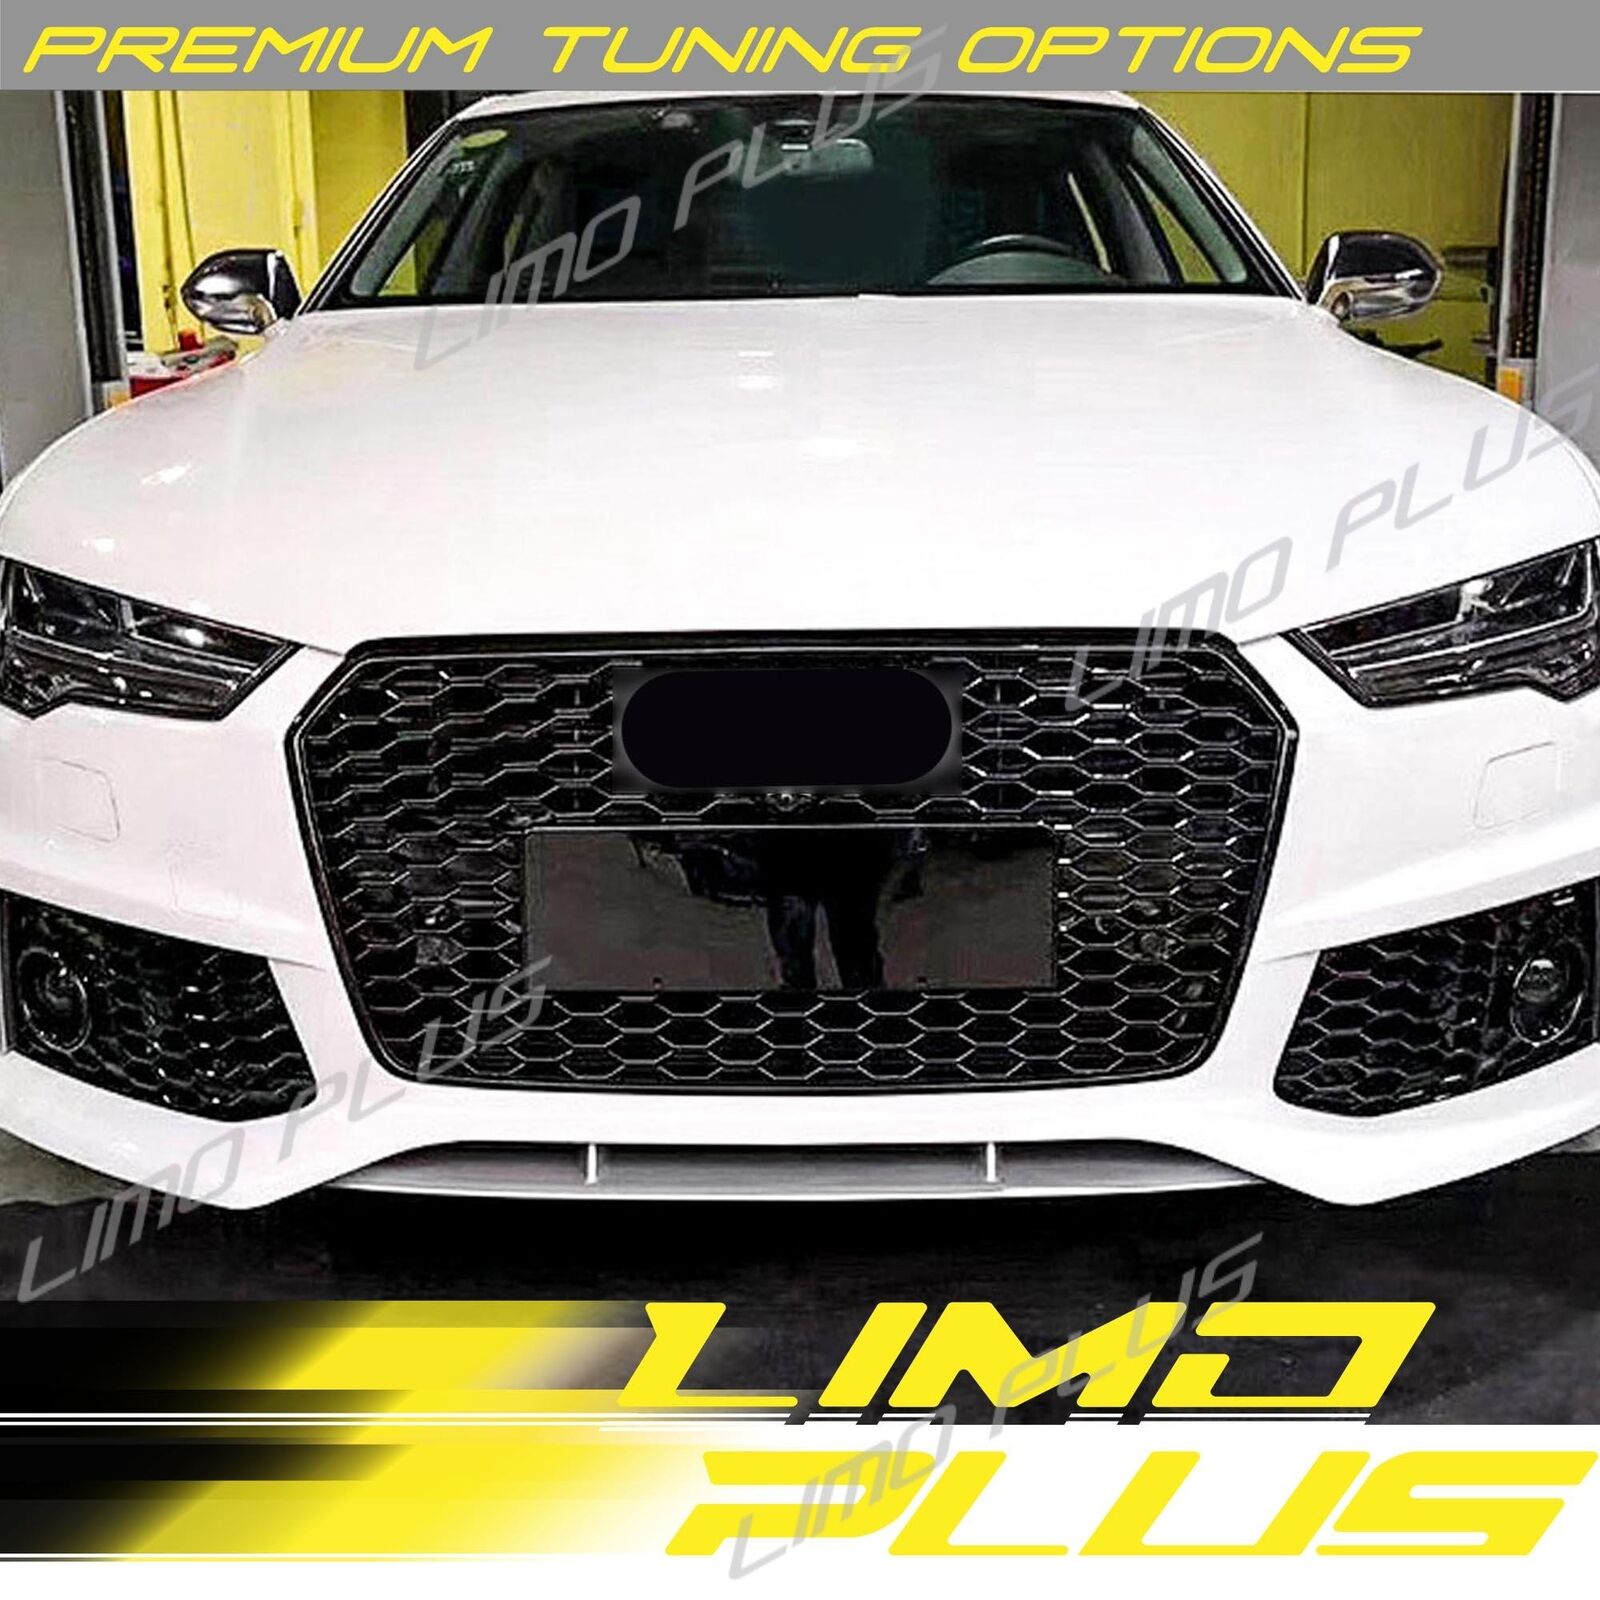 RS7 Style Front Honeycomb Mesh Grille for Audi A7 S7 2016 2017 2018